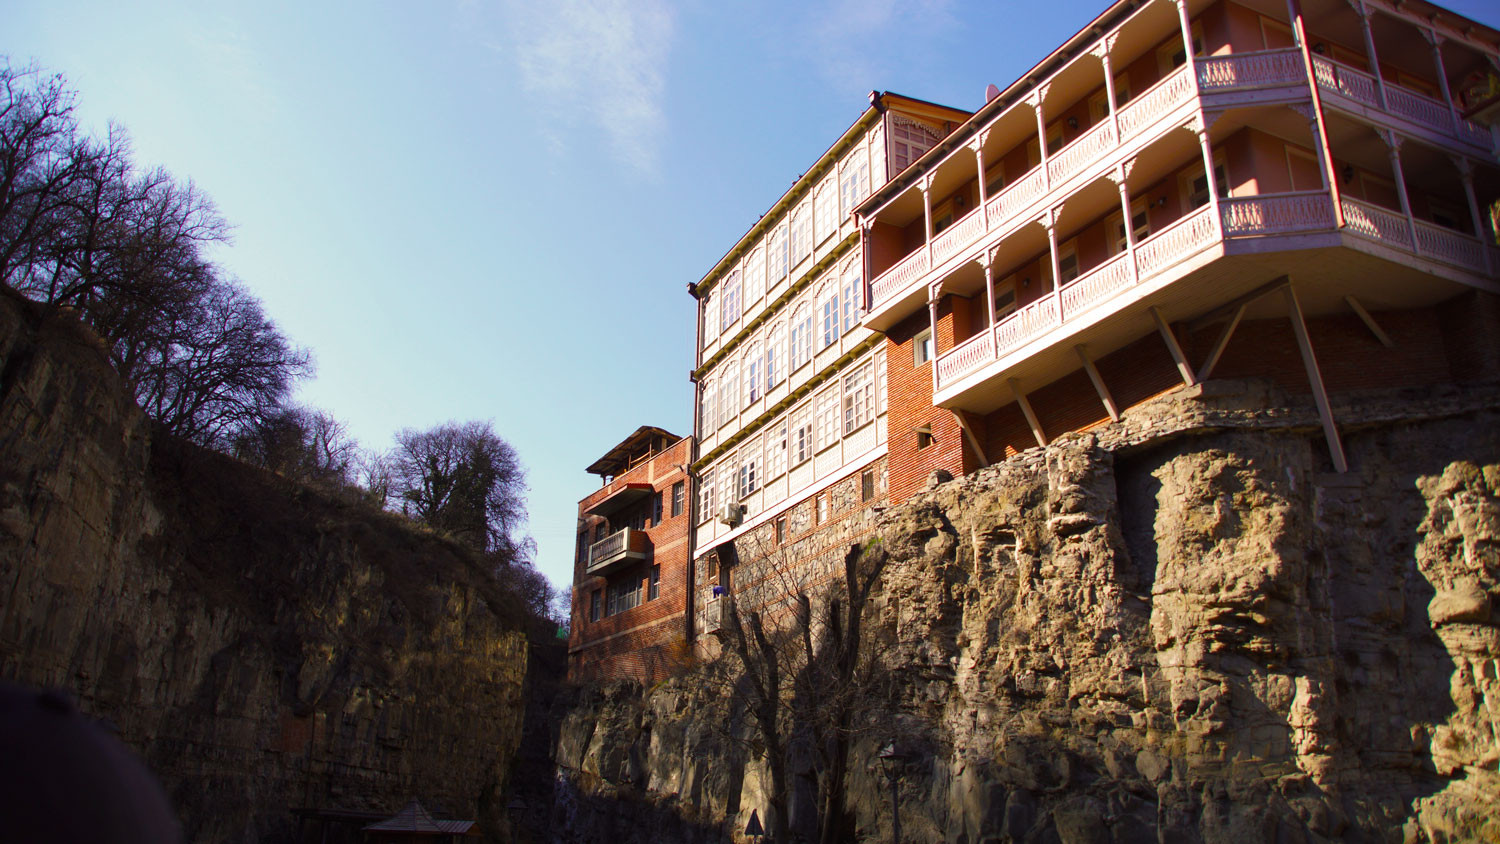 Wooden houses in Leghvtakhevi canyon, Tbilisi